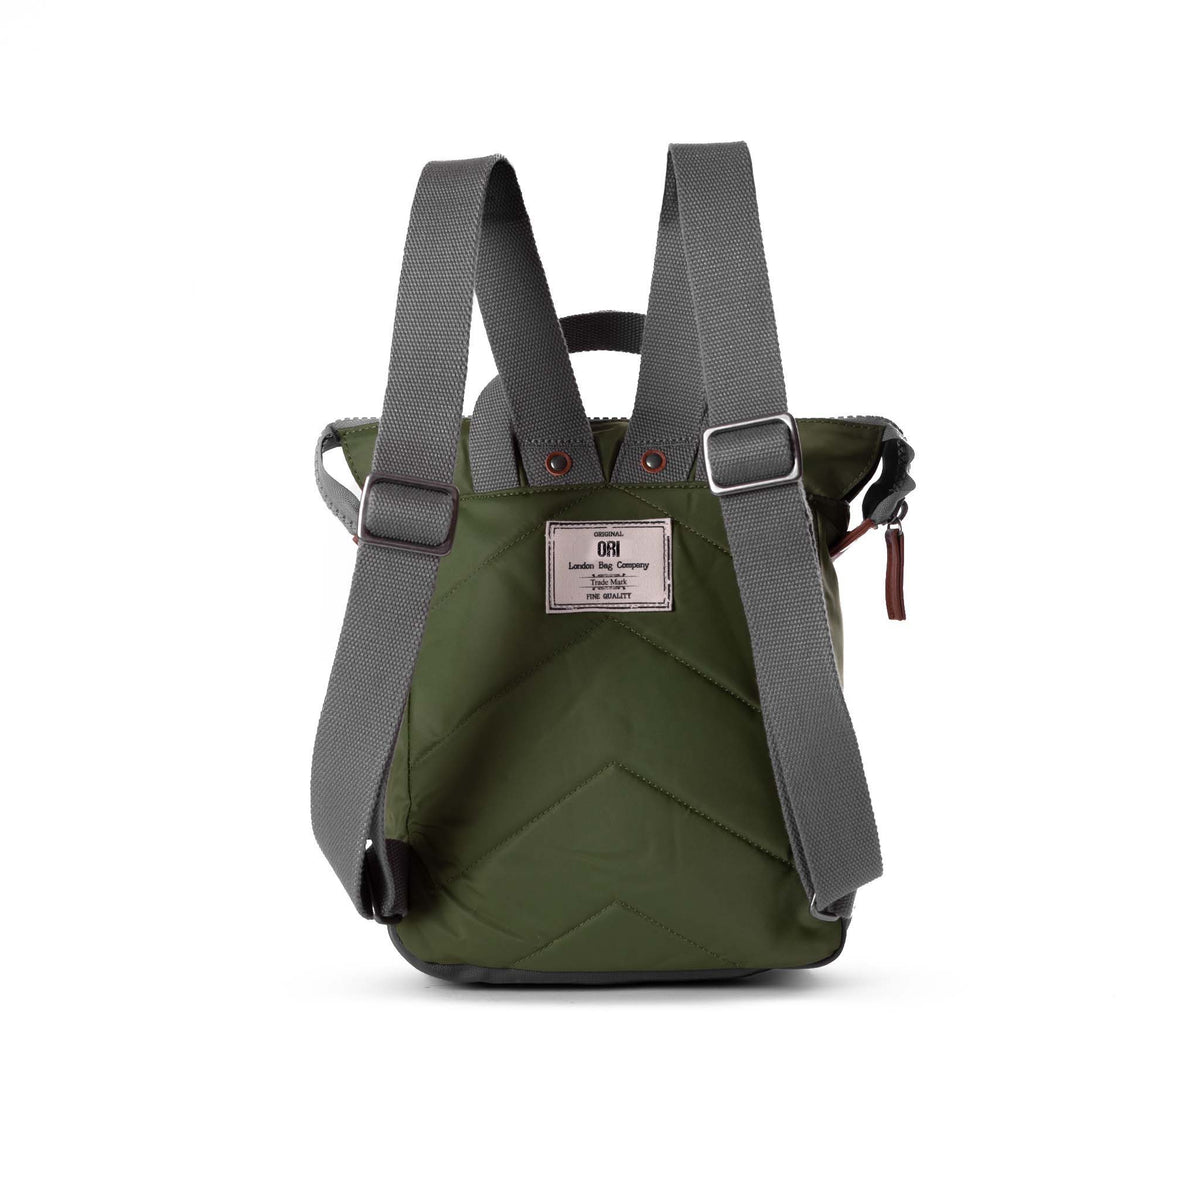 An ORI LONDON BANTRY BACKBACK NYLON SMALL AVOCADO, featuring gray straps and a front label, is displayed against a white background. It includes a water-resistant exterior and a dedicated sleeve for your laptop or tablet.